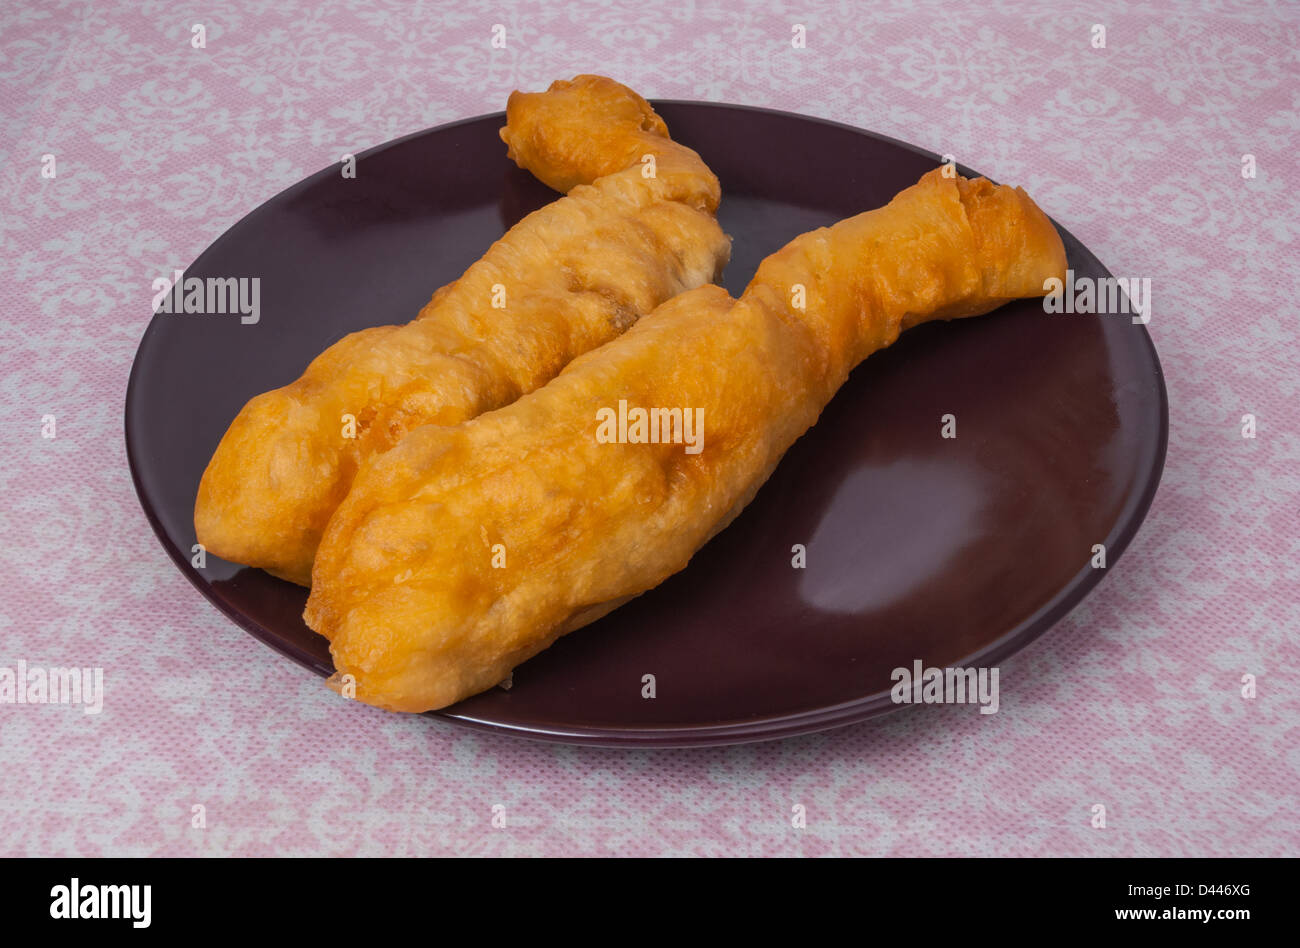 Giant Size of Youtiao/ The Giant Size Pathongko/ The Extra Size of Deep-Fried Doughstick Stock Photo